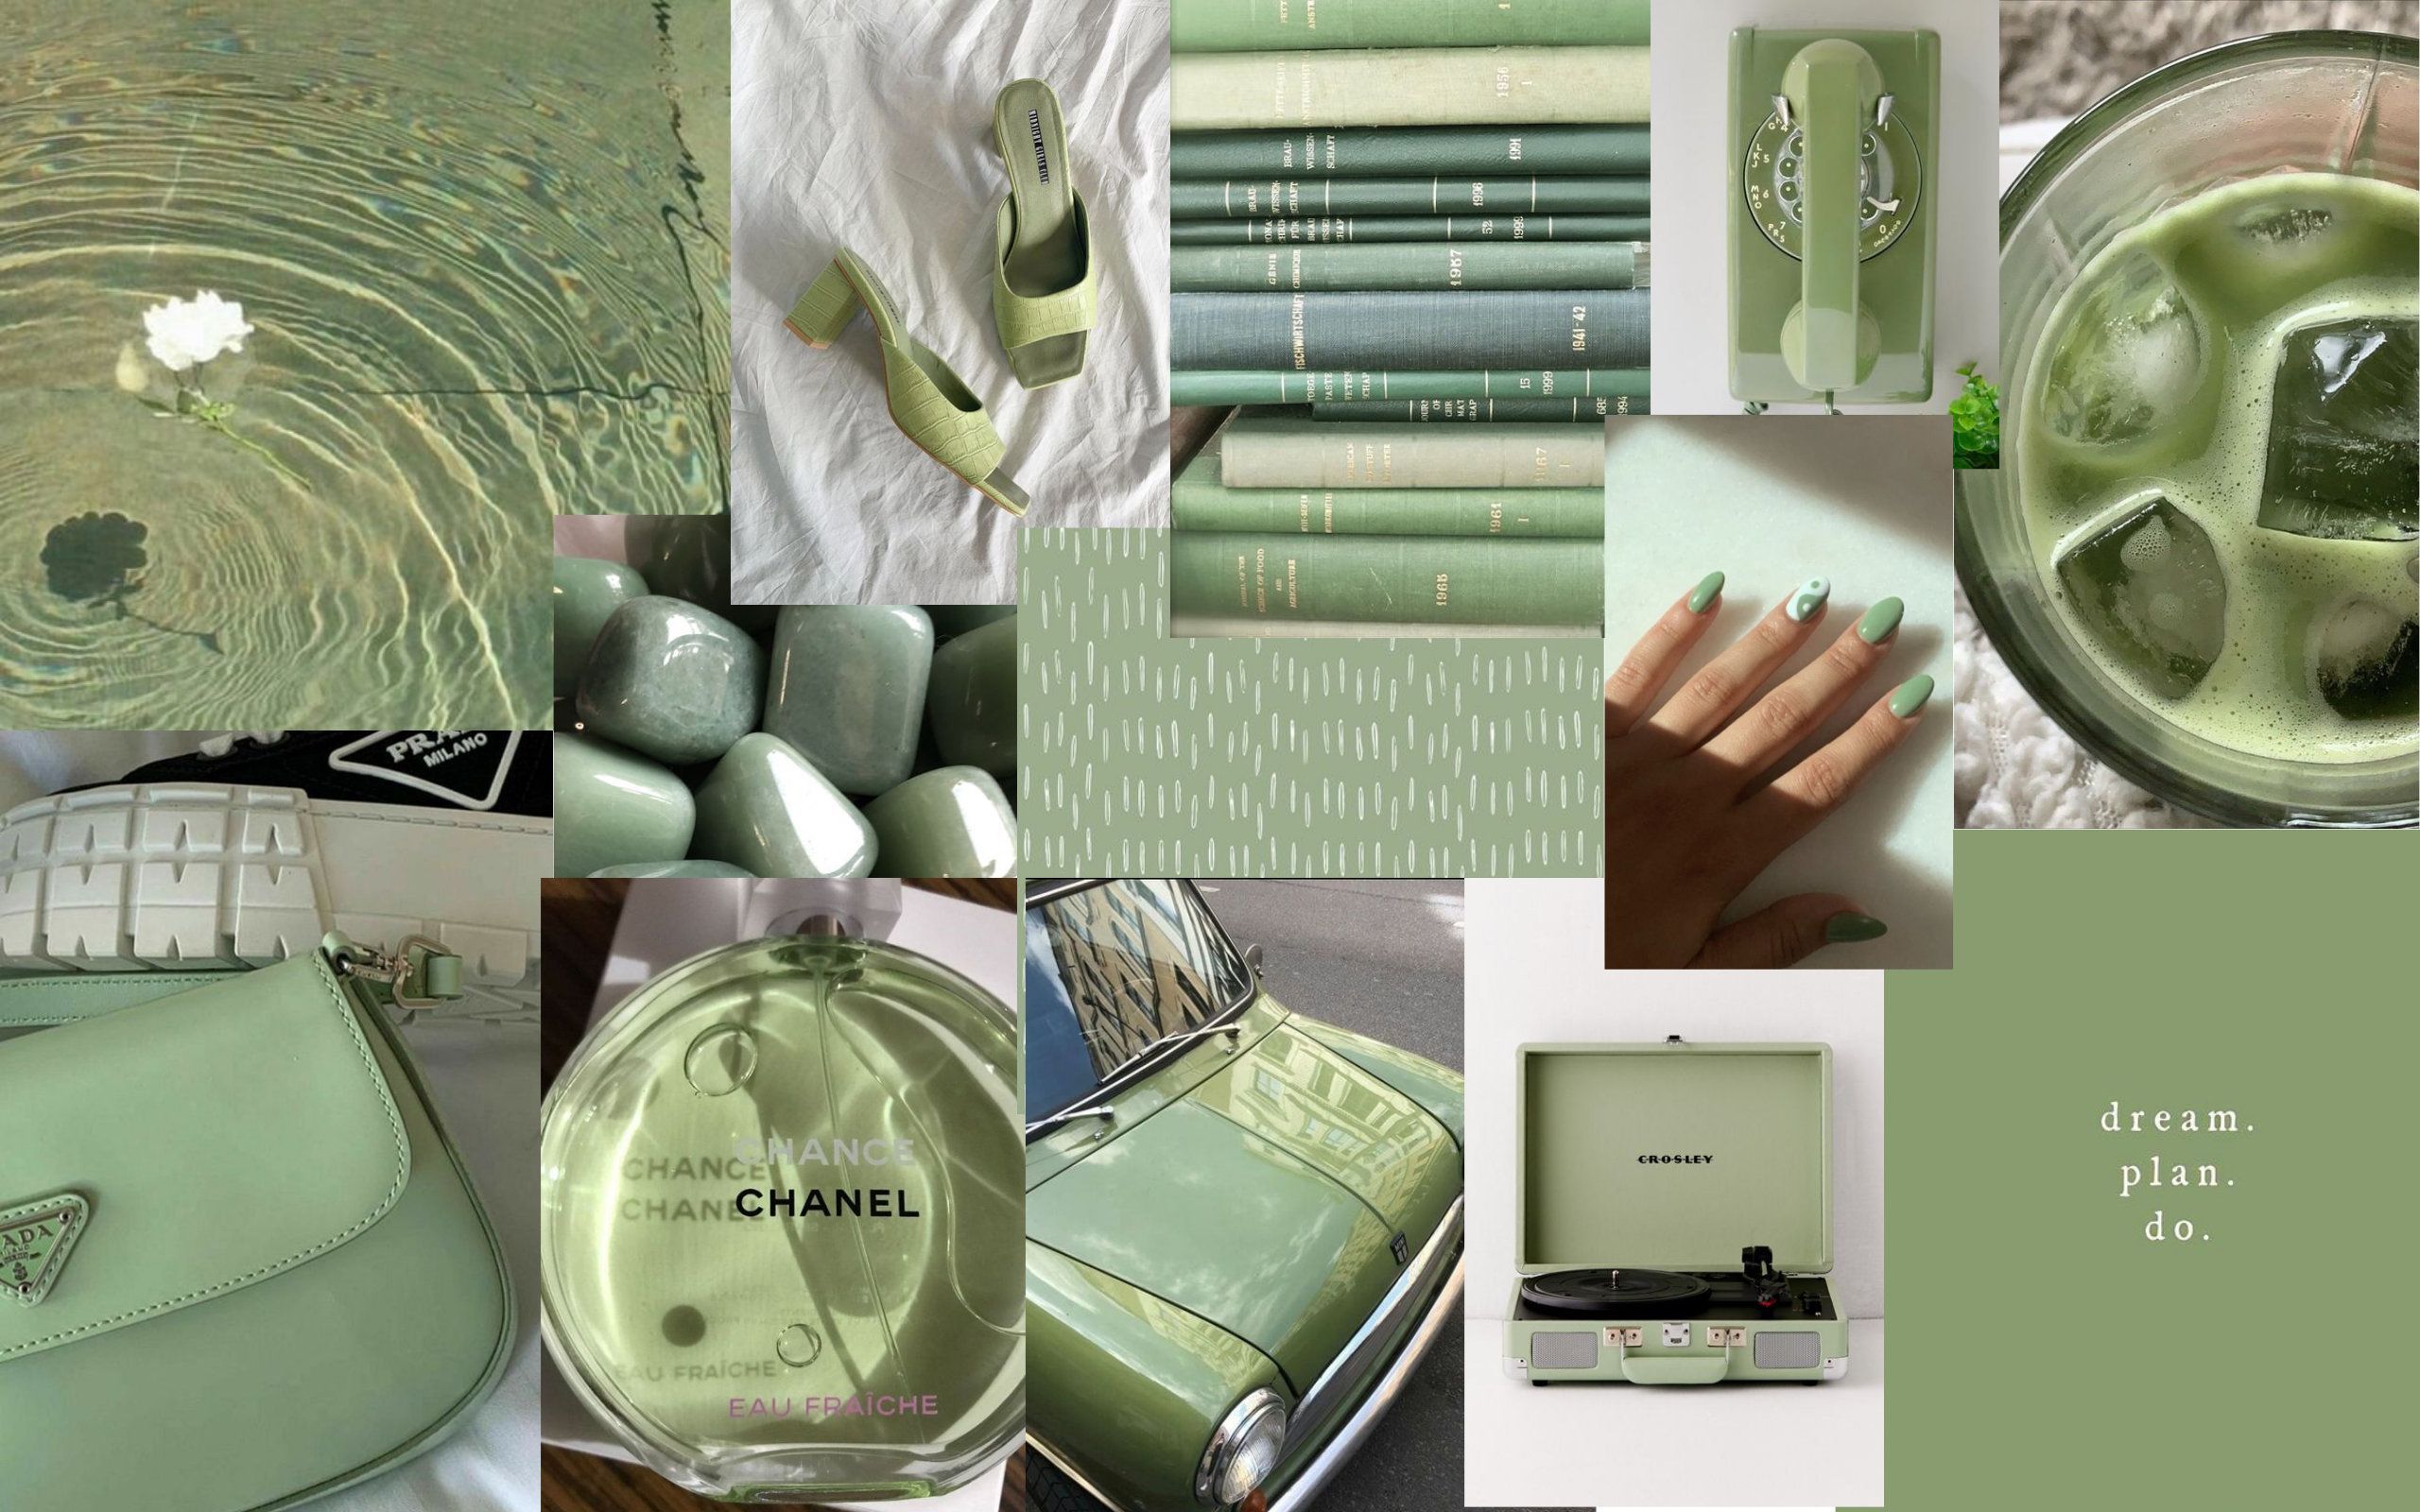 A collage of pictures with green items - Green, collage, sage green, Chanel